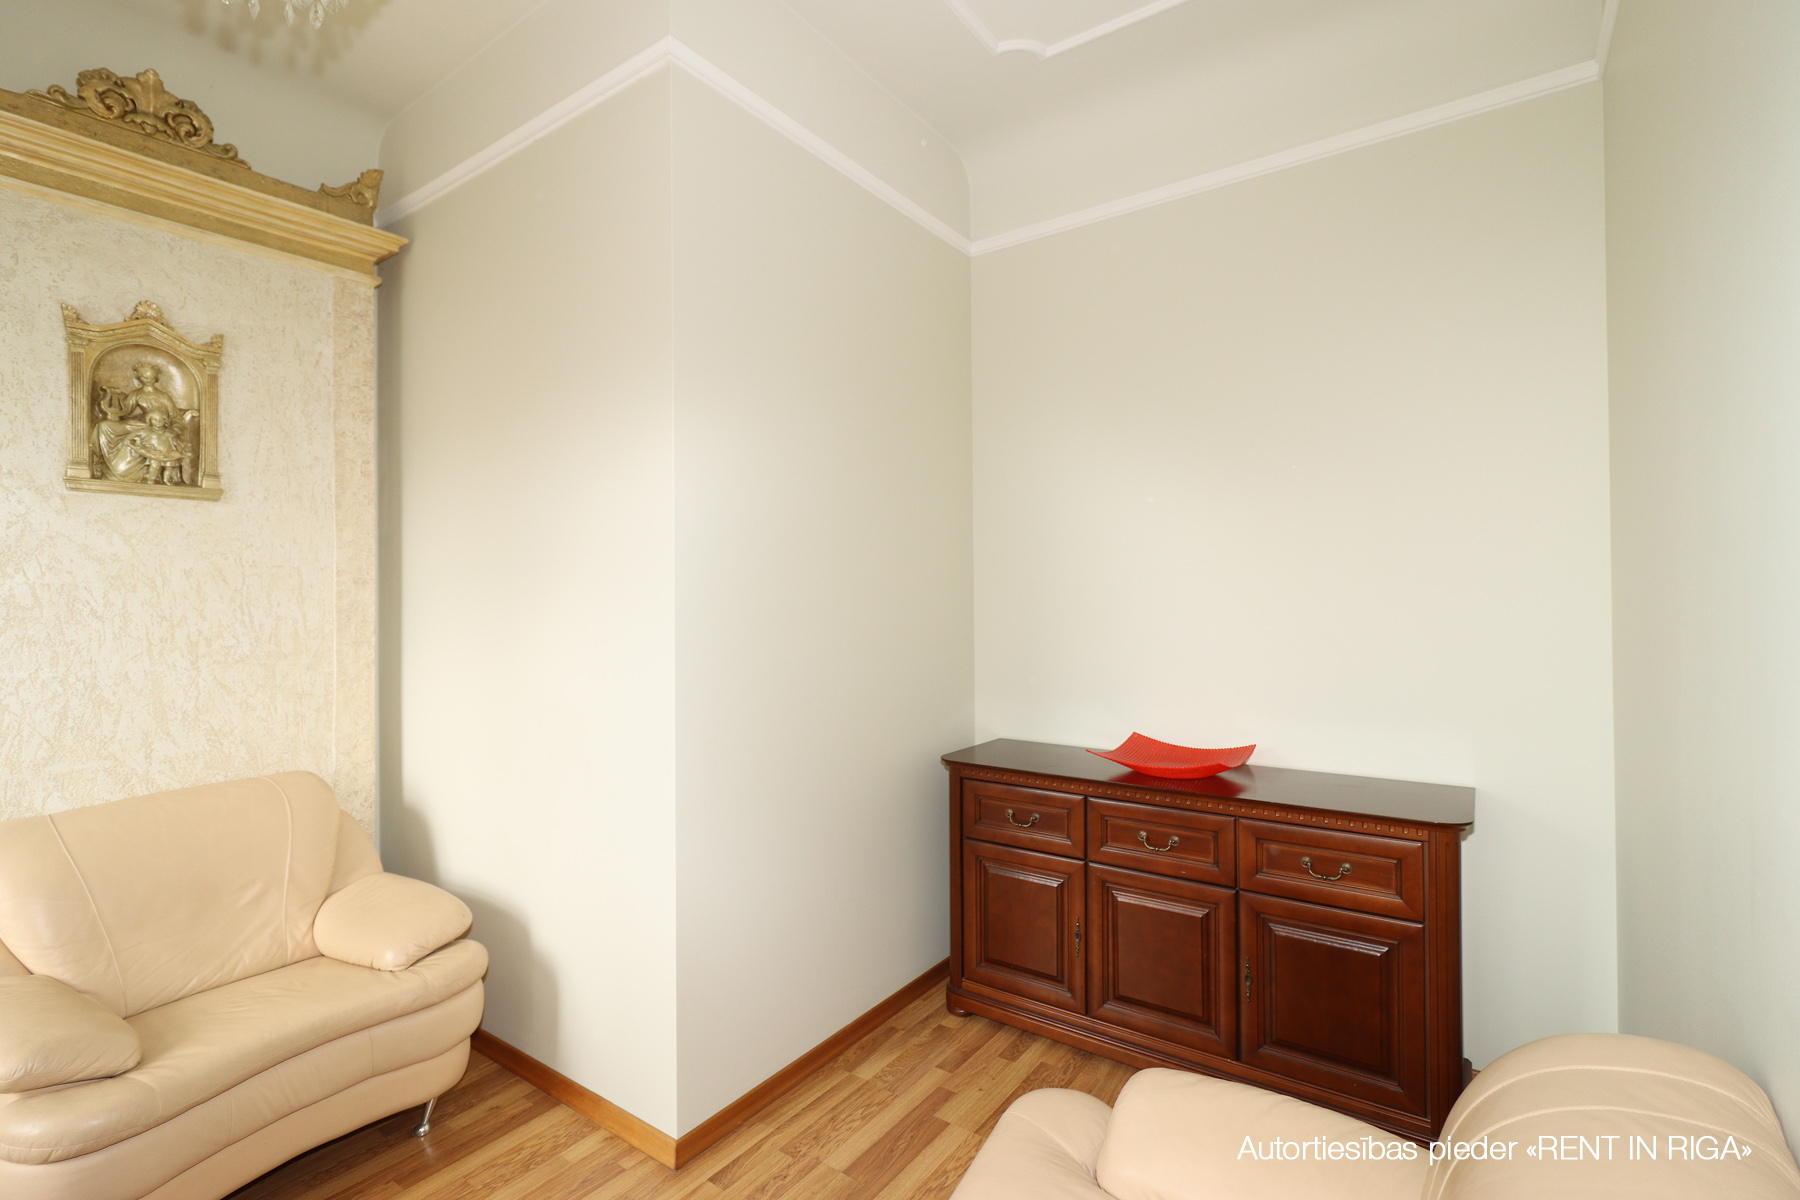 Apartment for rent, Barona street 60 - Image 1